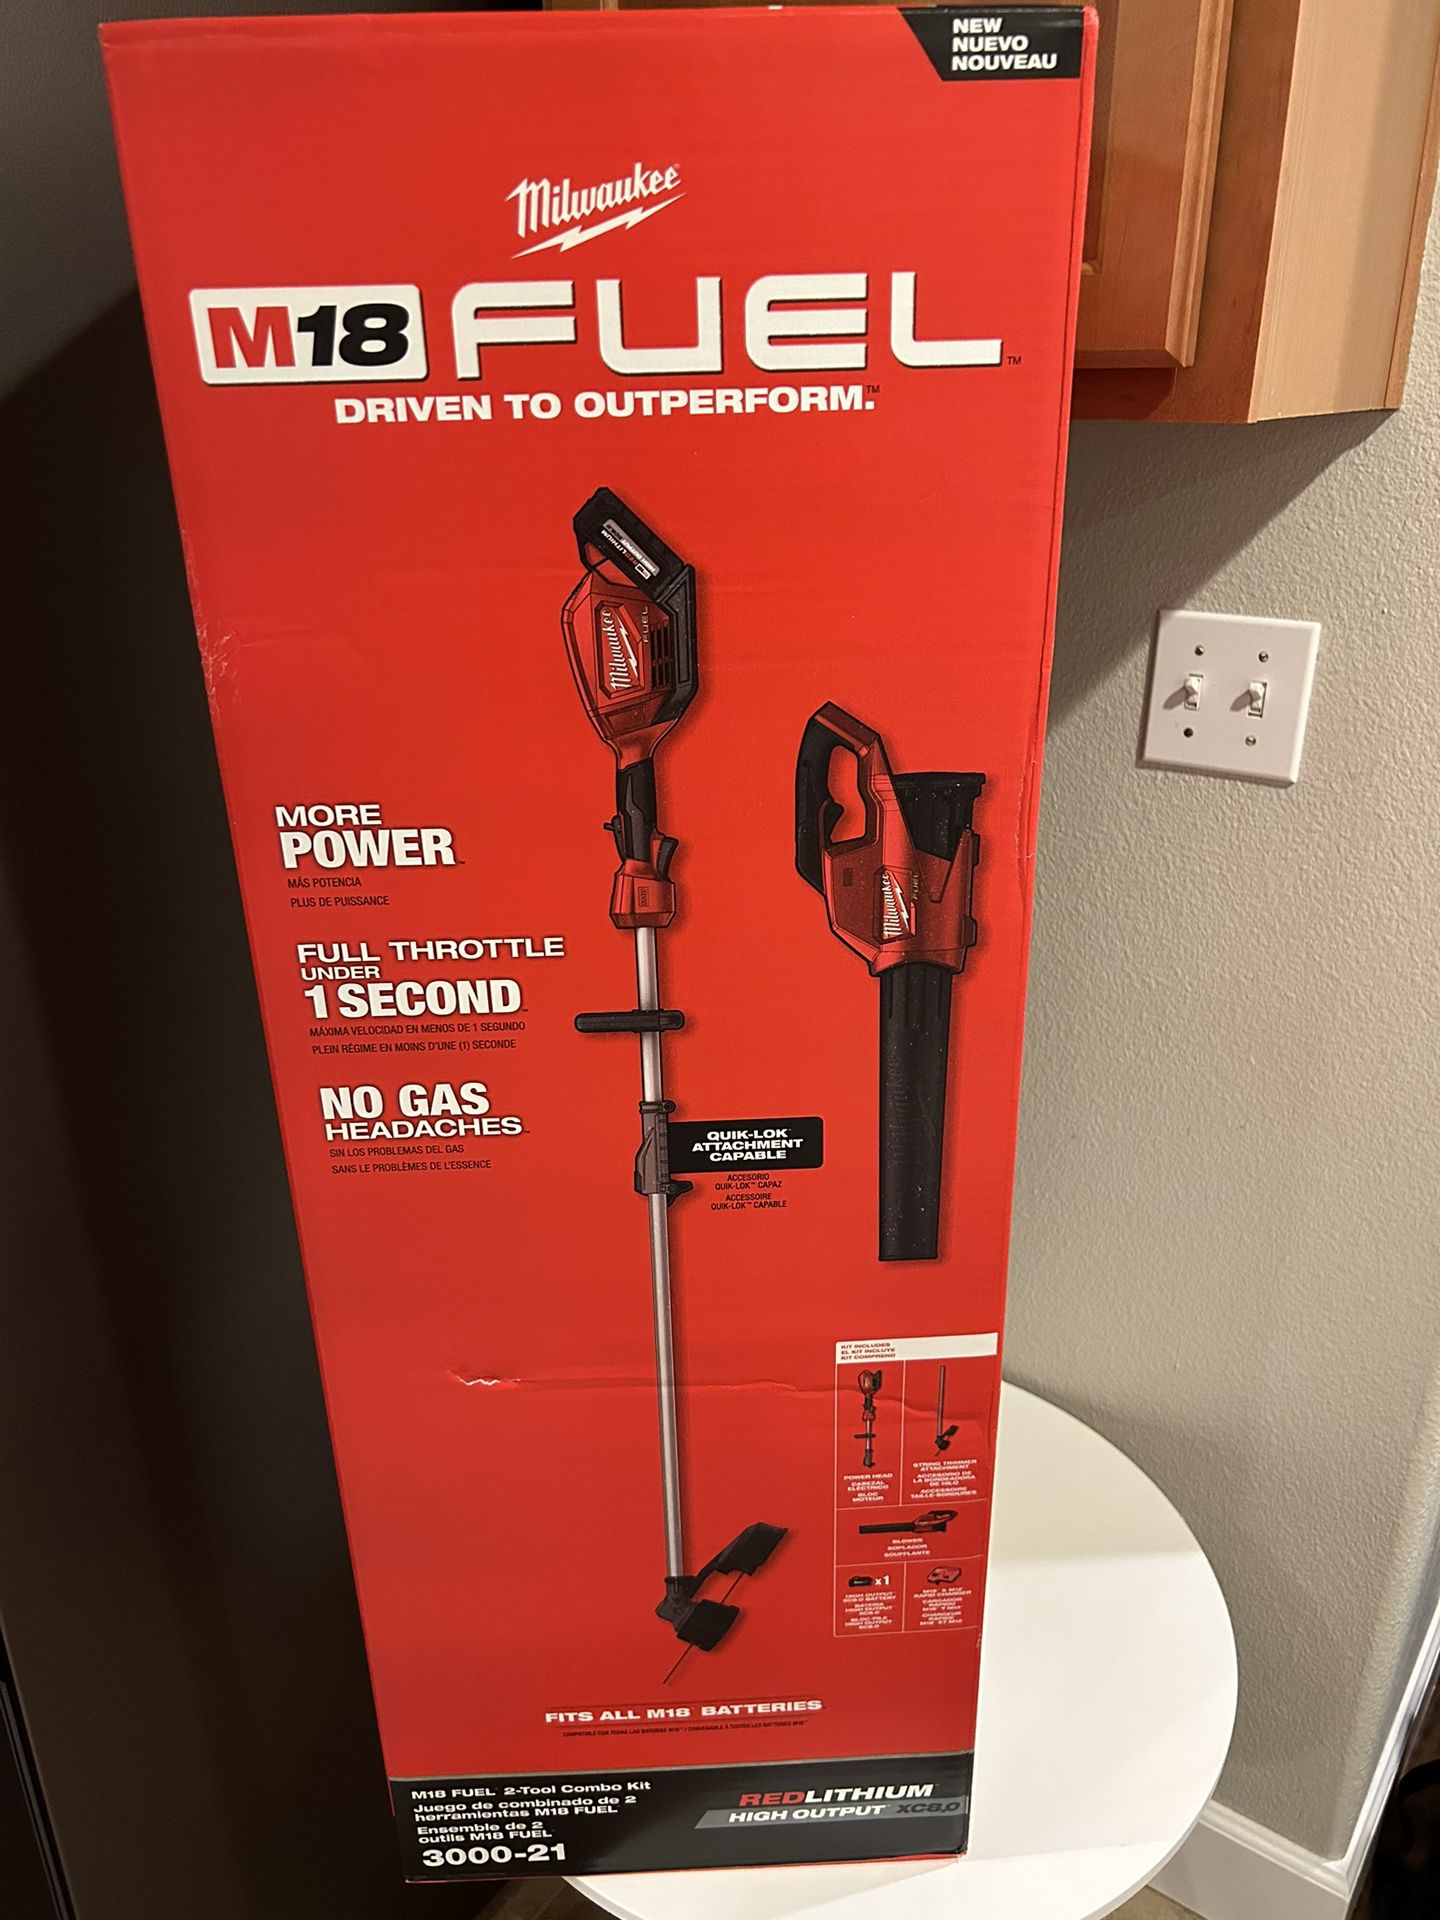 Milwaukee 3000-21 M18 Fuel 2 Tool String Trimmer & Blower Combo Kit